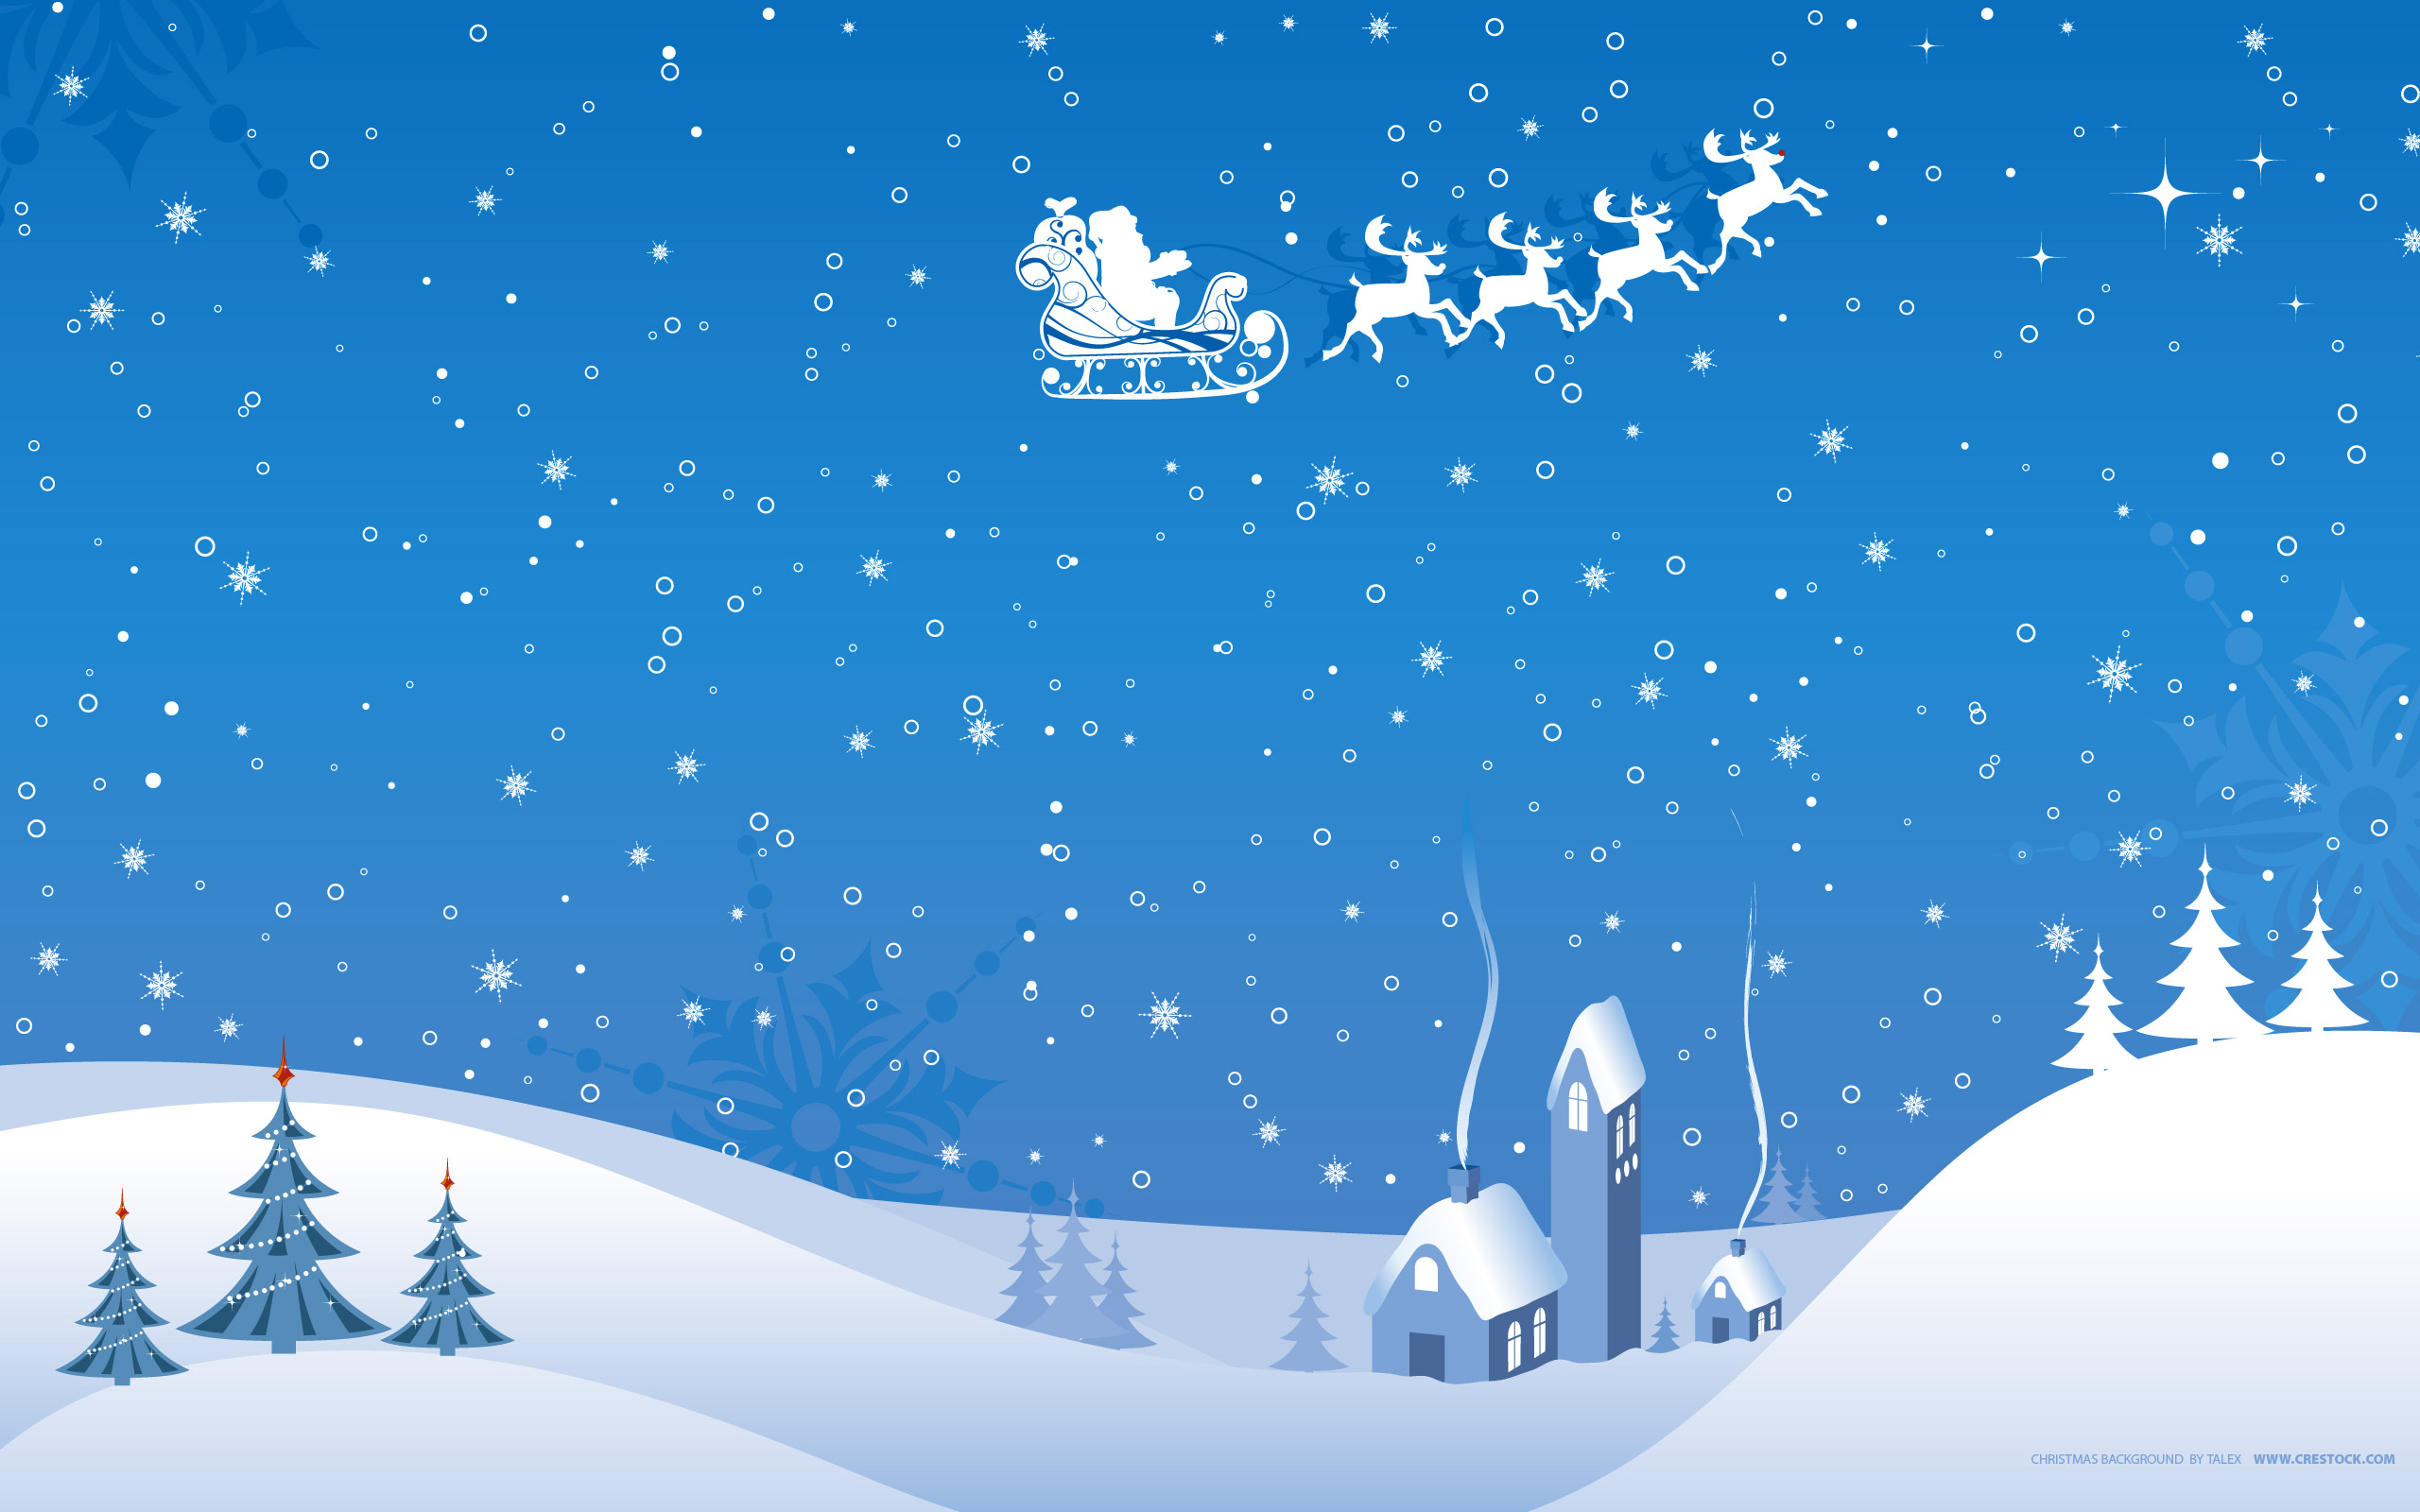 Christmas backgrounds free